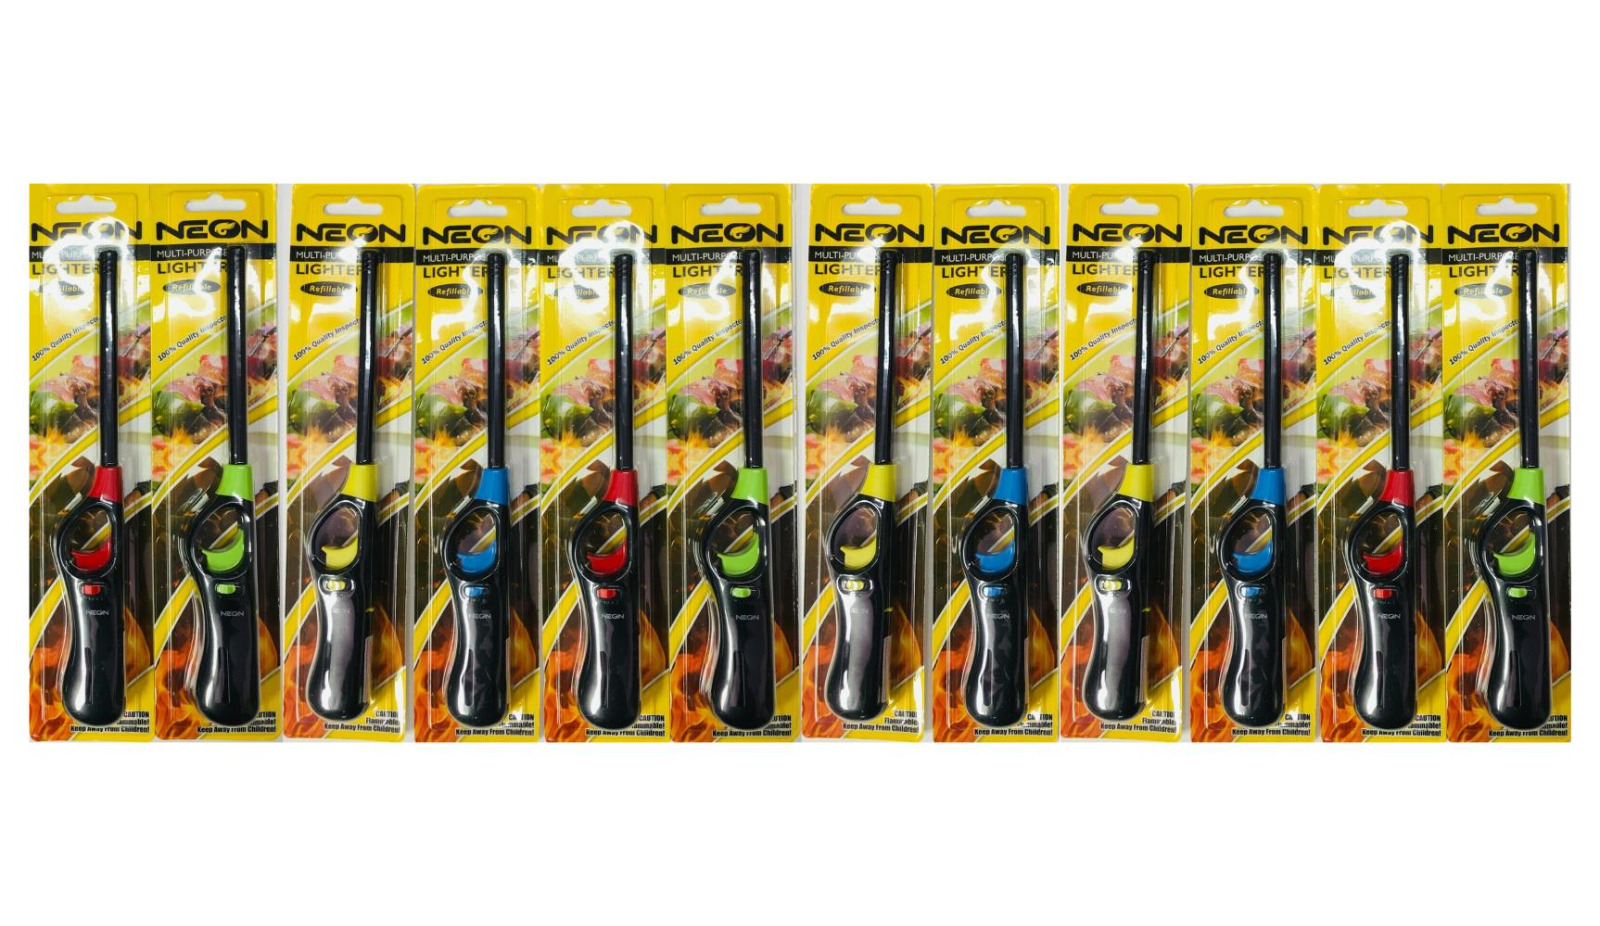 Neon Multi-purpose Refillable Lighters Fireplace Grill Gas Stove BBQ (12 Packs)